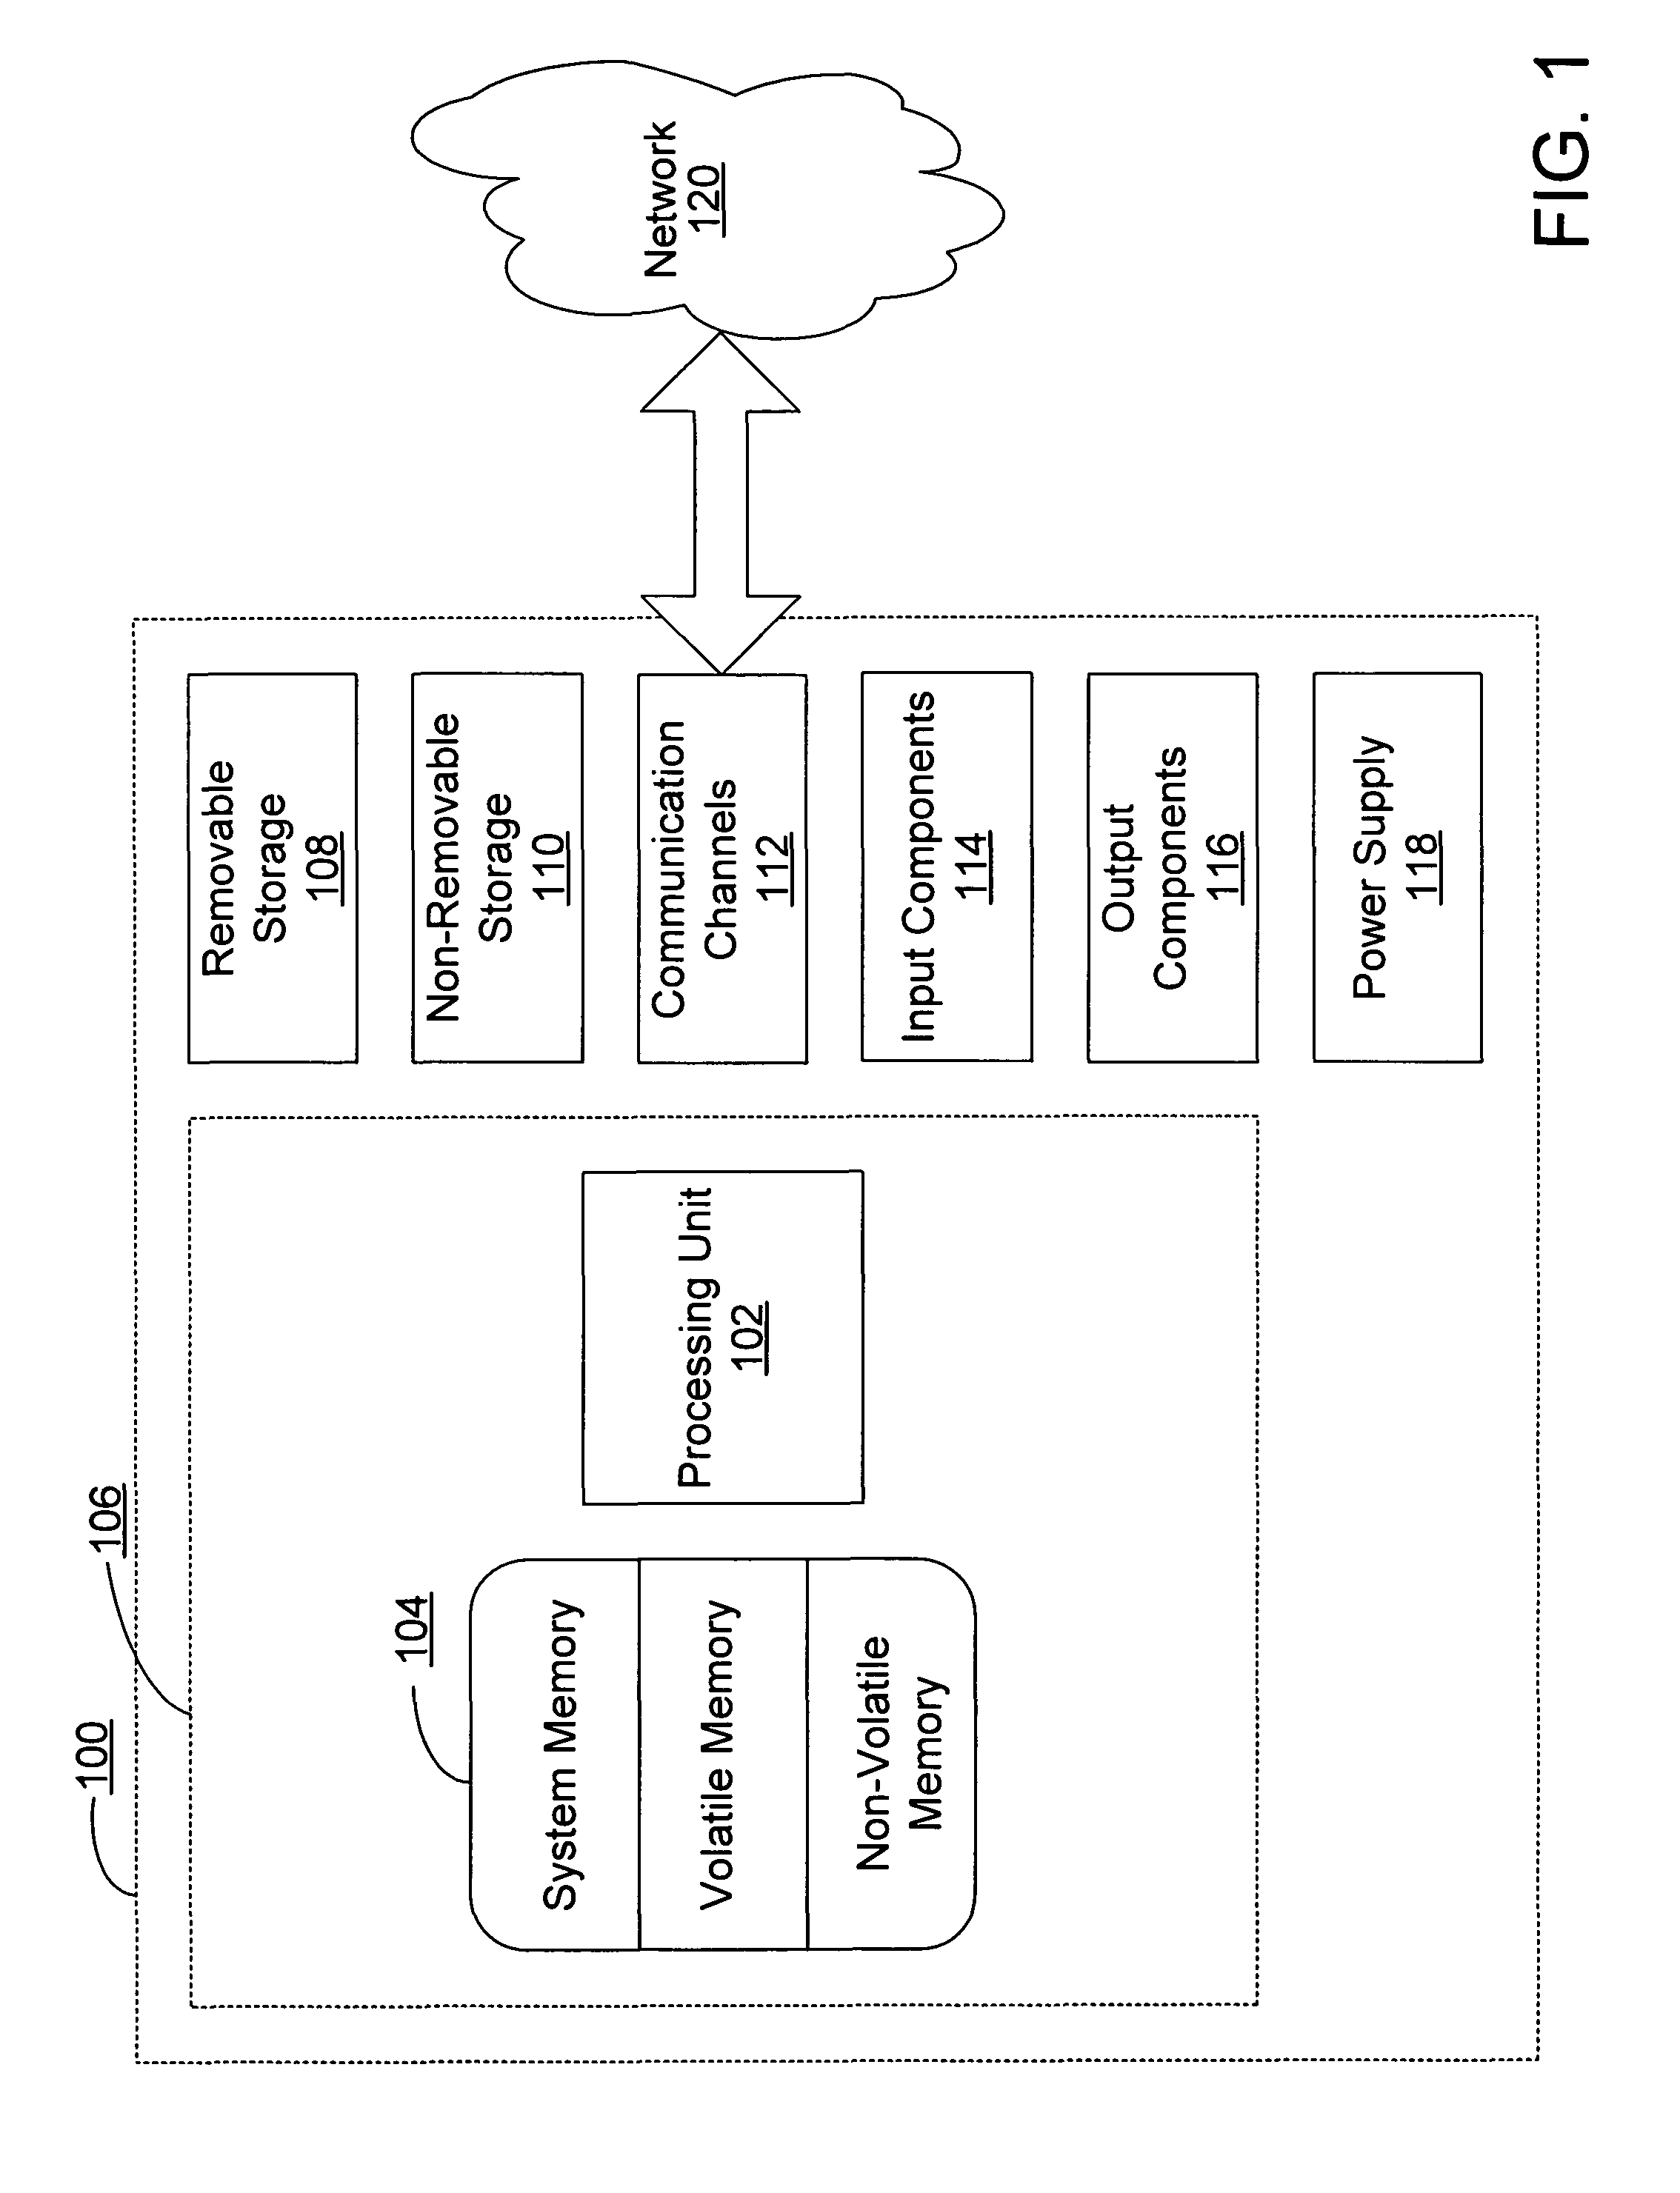 Method for efficient content distribution using a peer-to-peer networking infrastructure